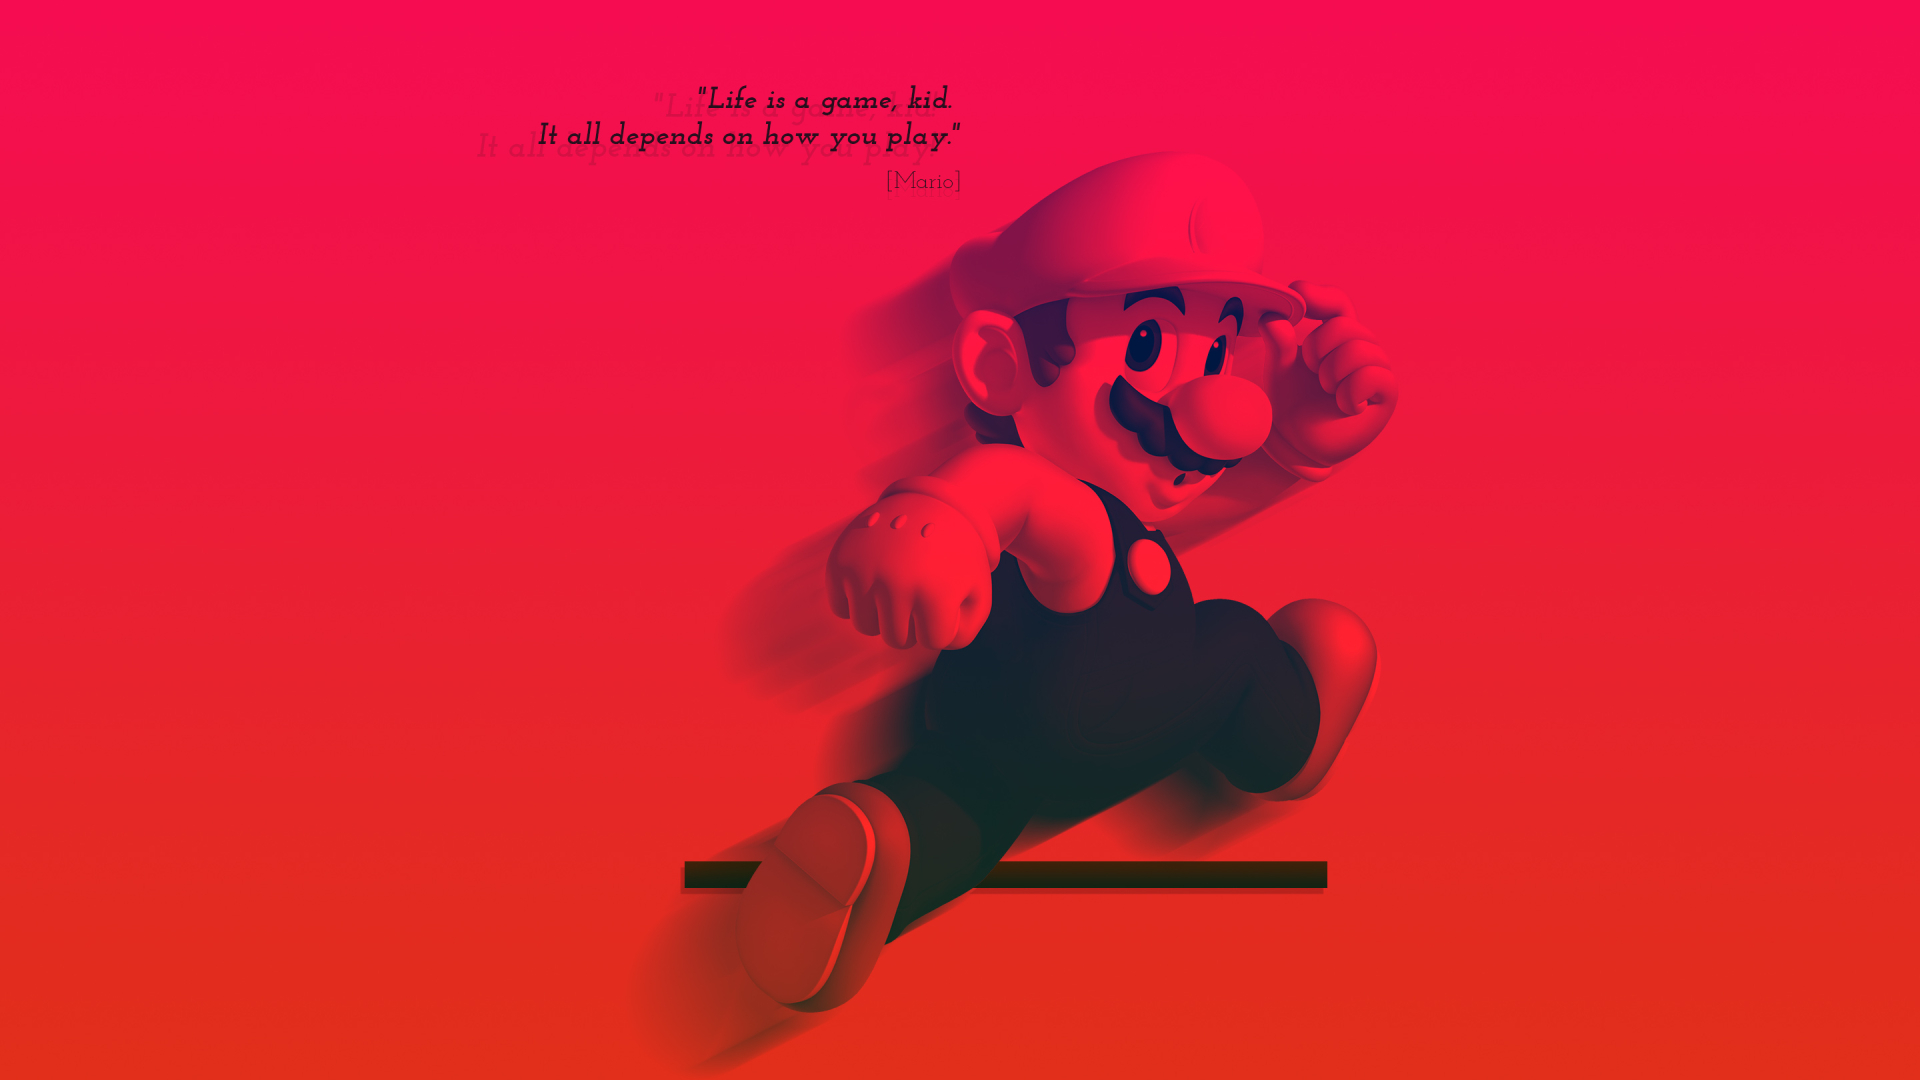 1920x1080 Life Is A Game Mario Quote 1080p Laptop Full Hd Wallpaper Hd Inspirational Quotes 4k Wallpapers Images Photos And Background